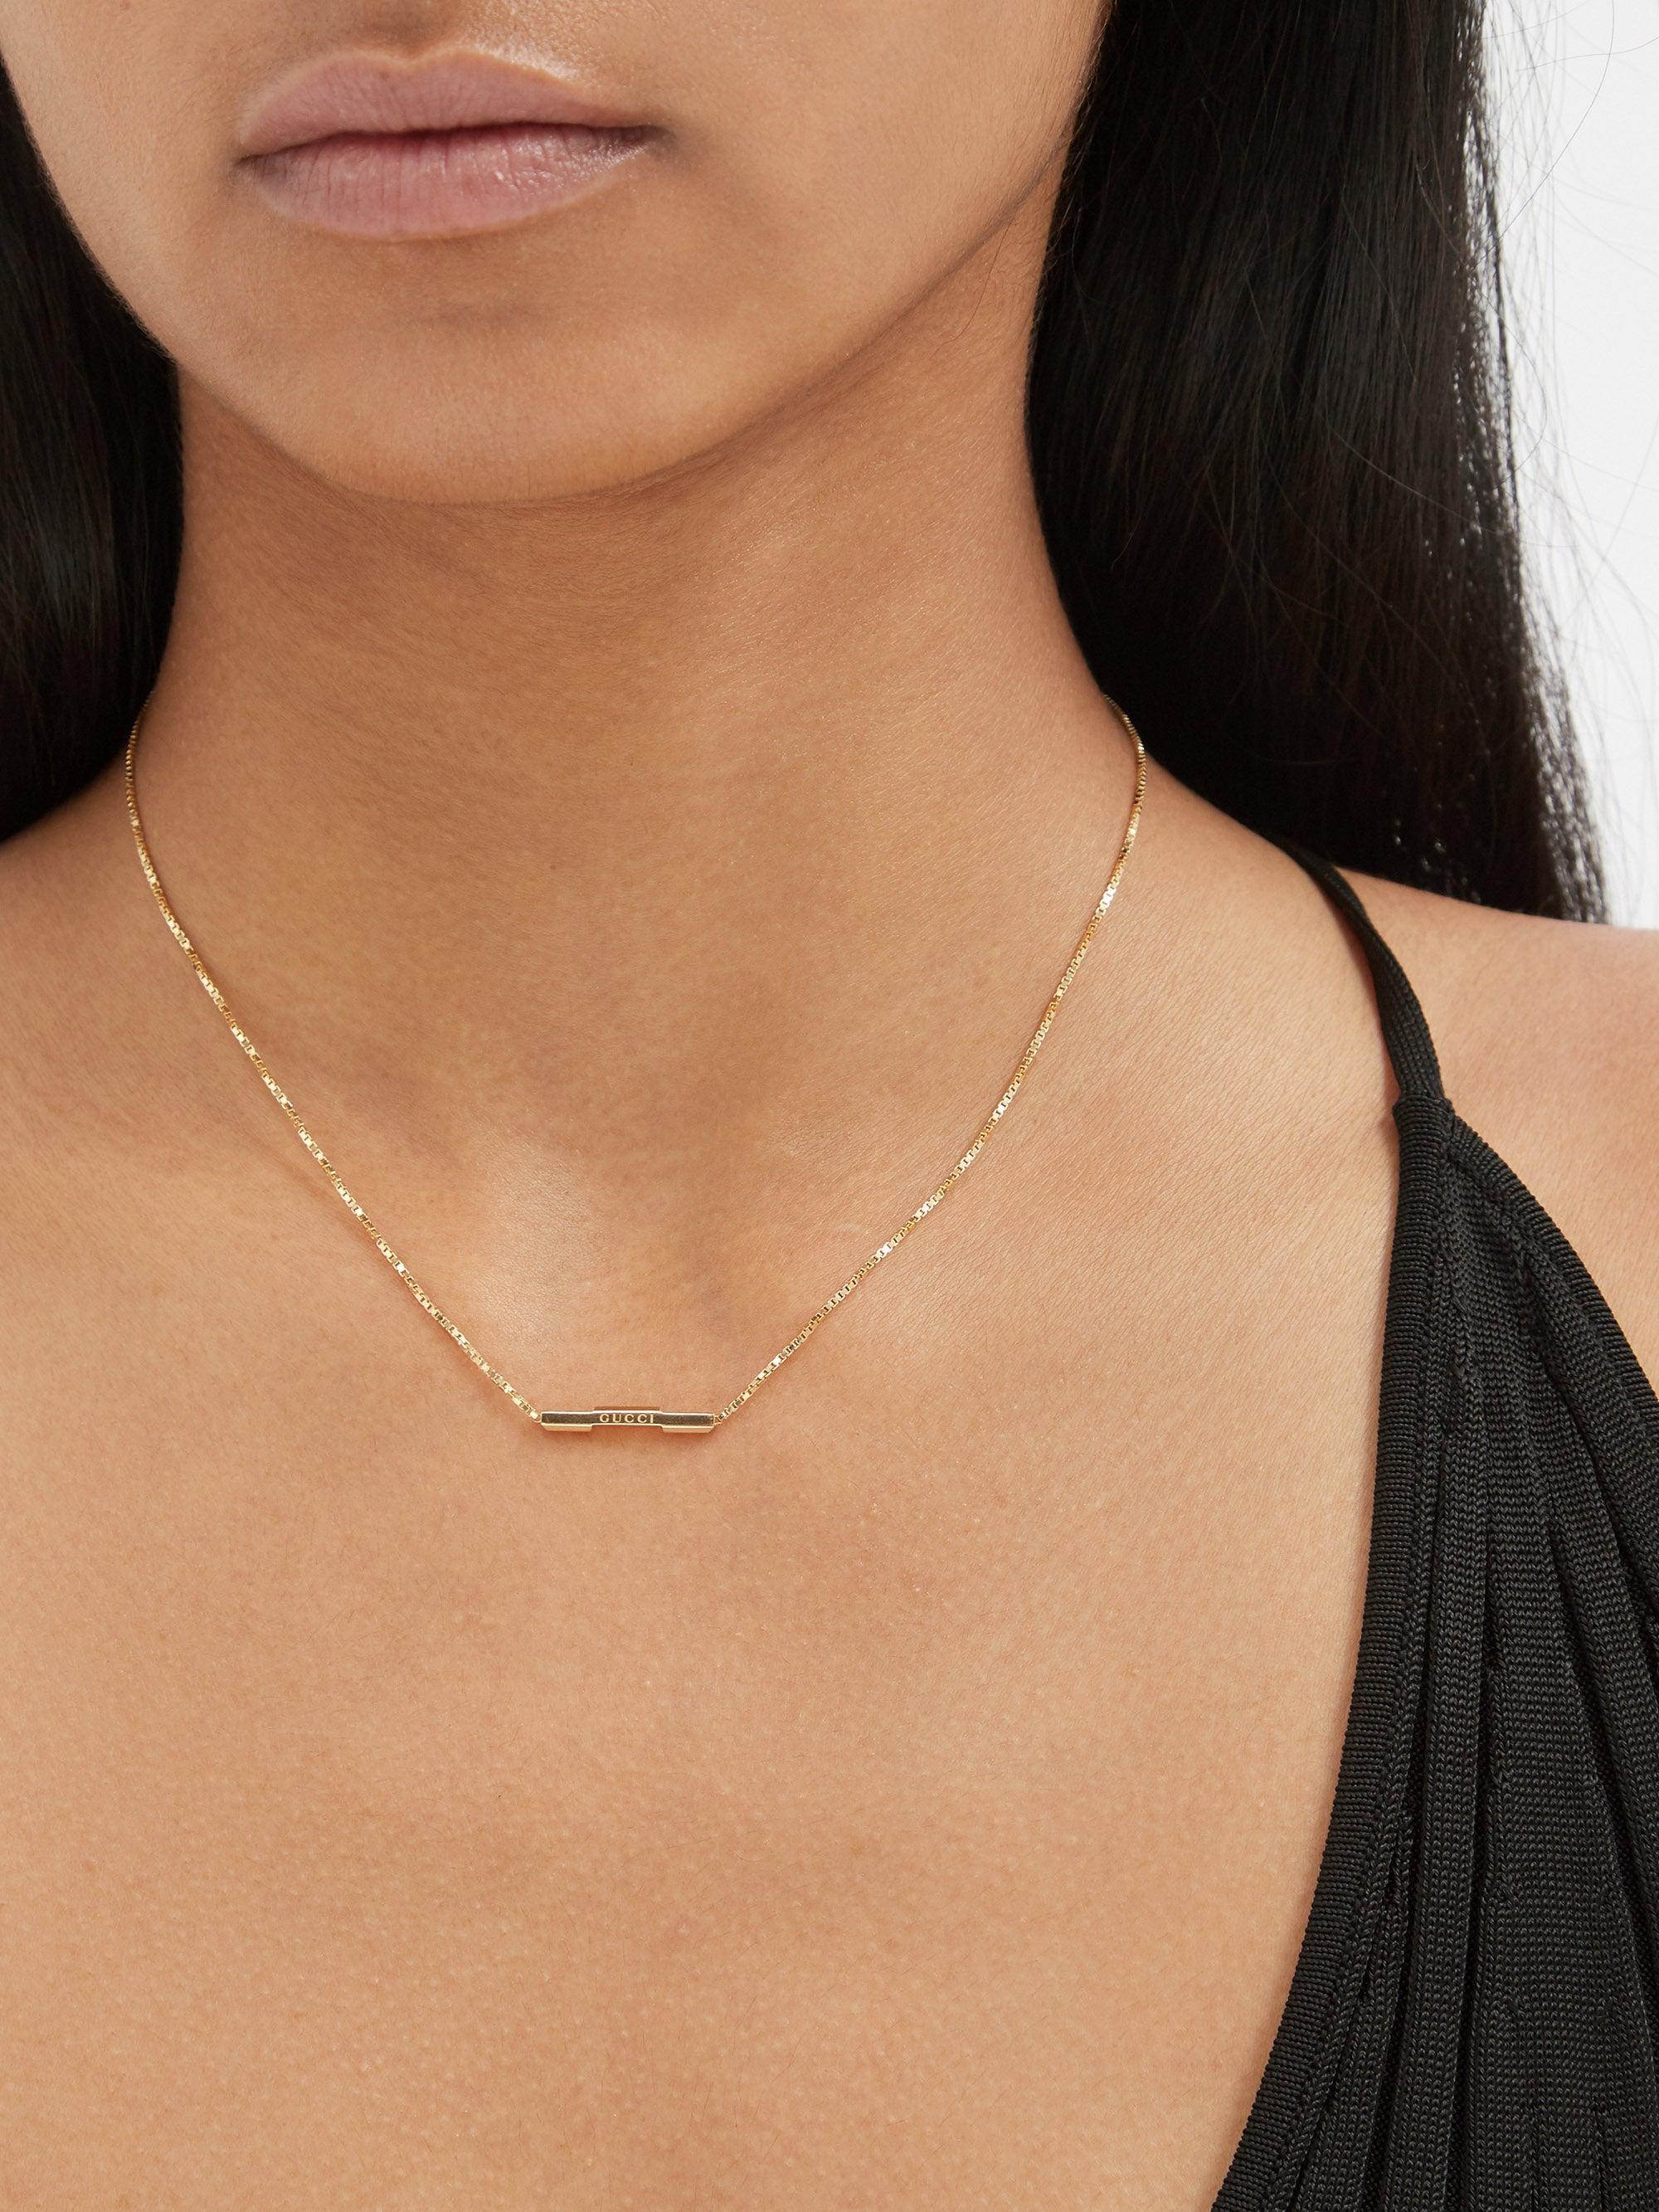 Gucci Link To Love Bar 18kt Gold Necklace in Metallic | Lyst Australia